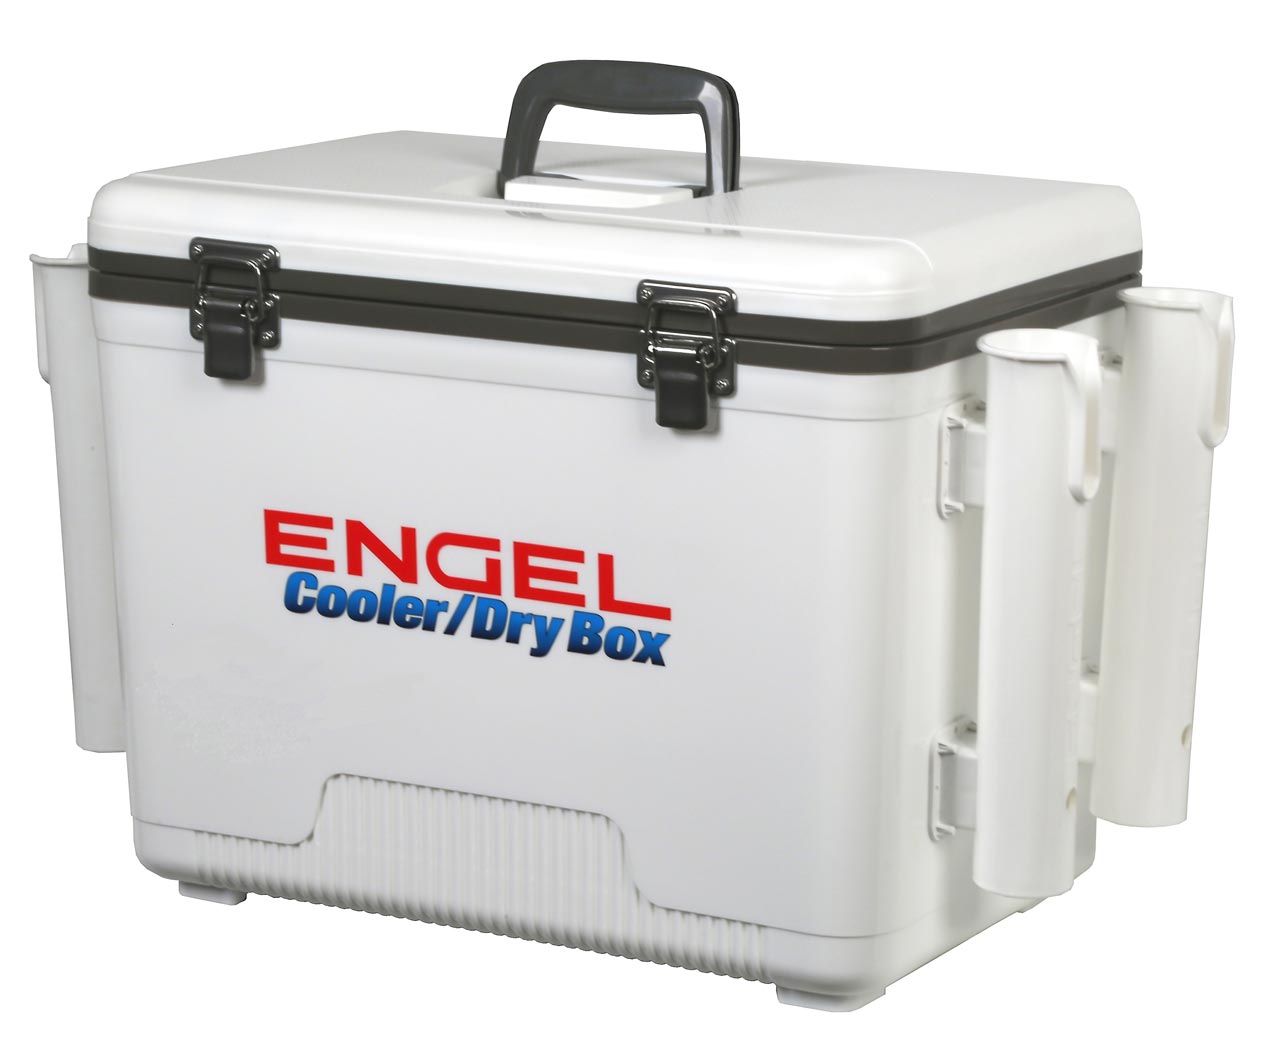 Engel 19 Qt. Cooler/Dry Box with Rod Holders - White